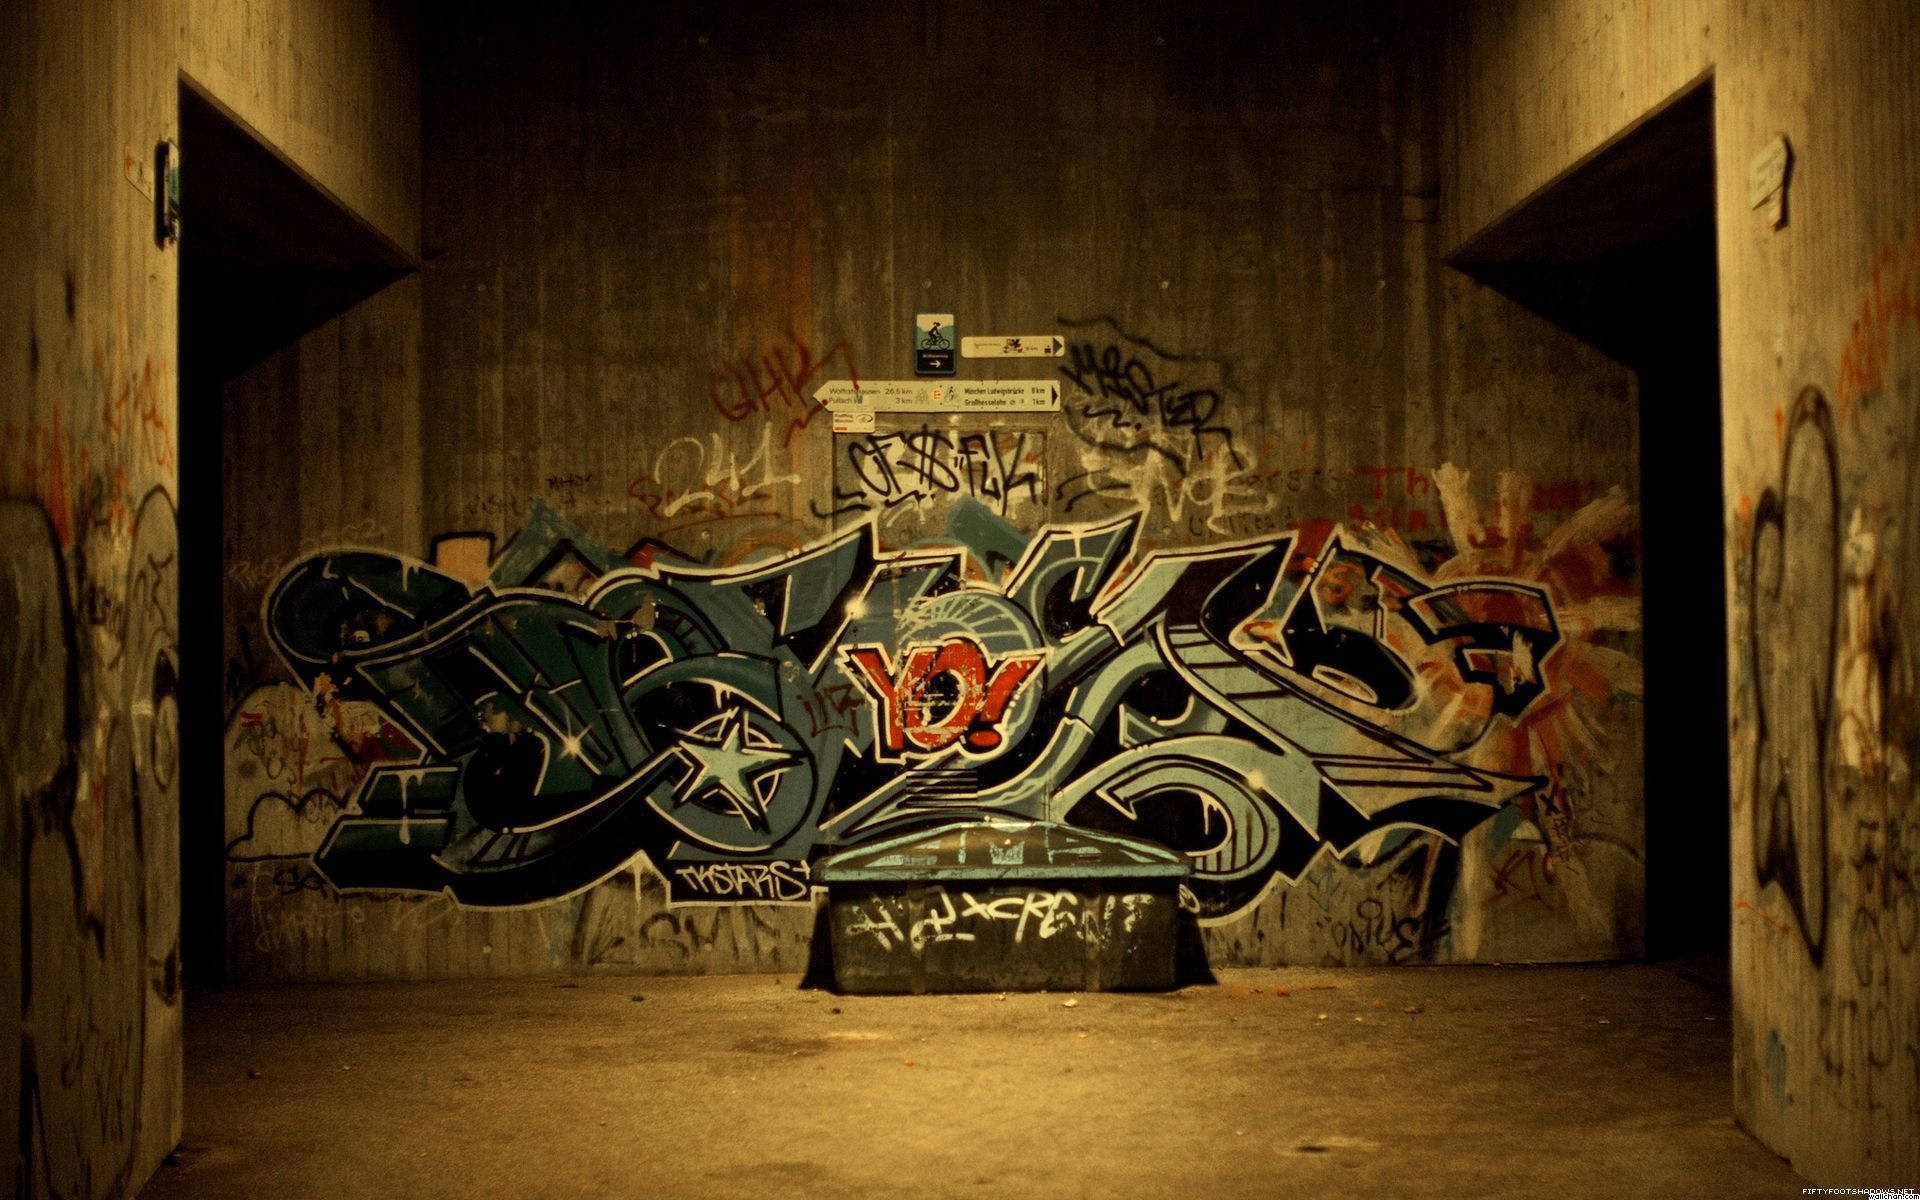 Abandoned Site With Urban Art Background